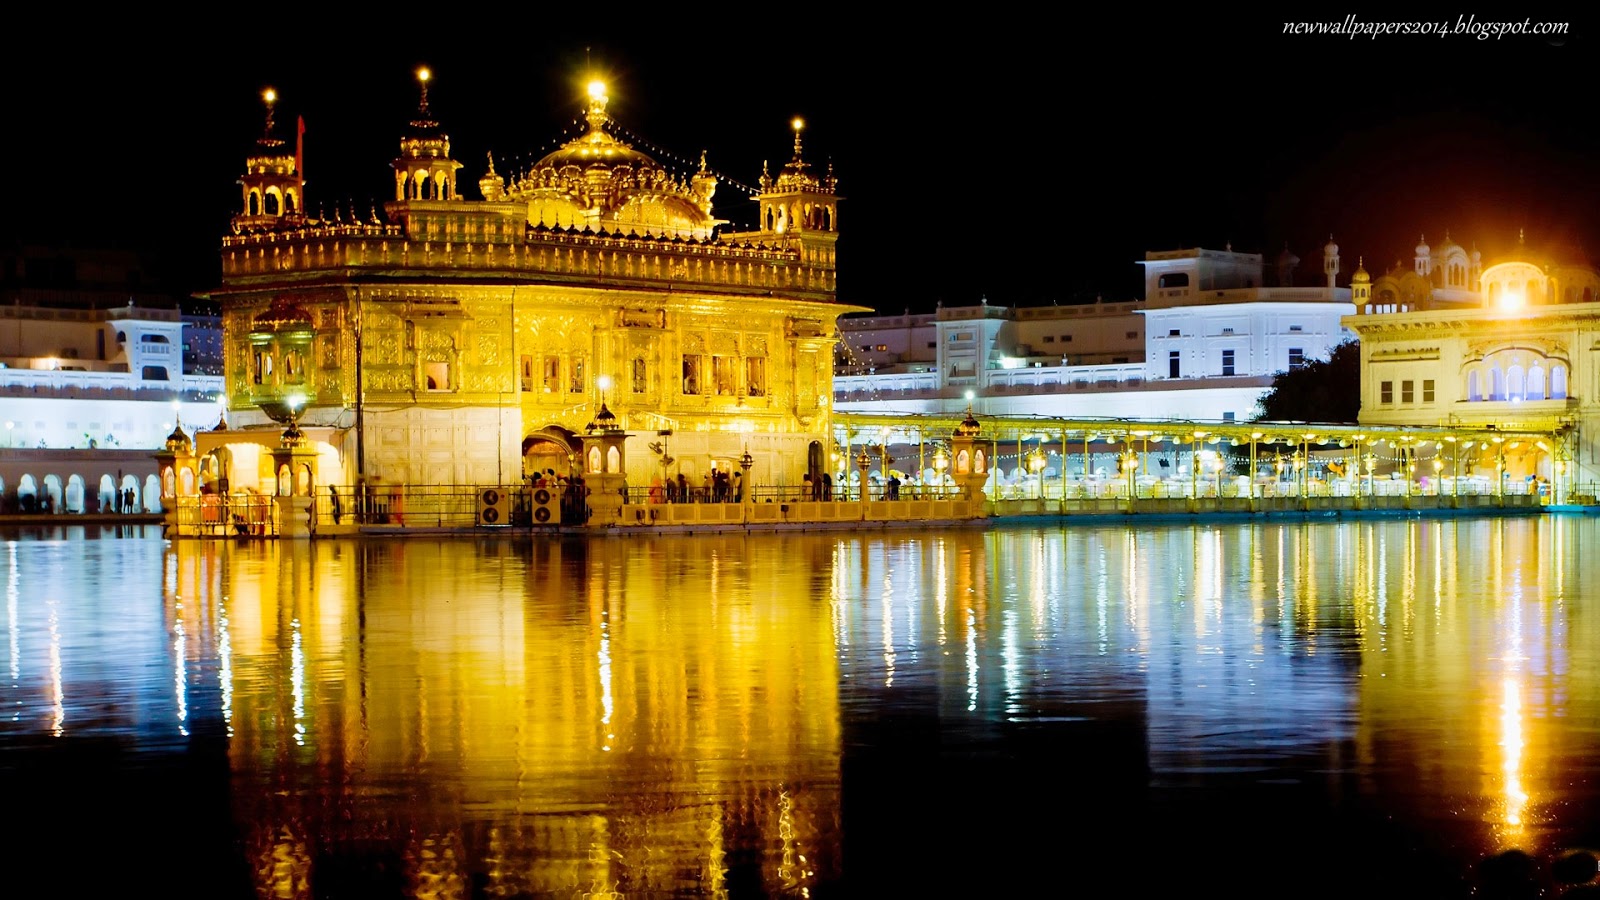 The Golden Temple The Golden Temple Hd Wallpapers Hd Wallpapers 2014